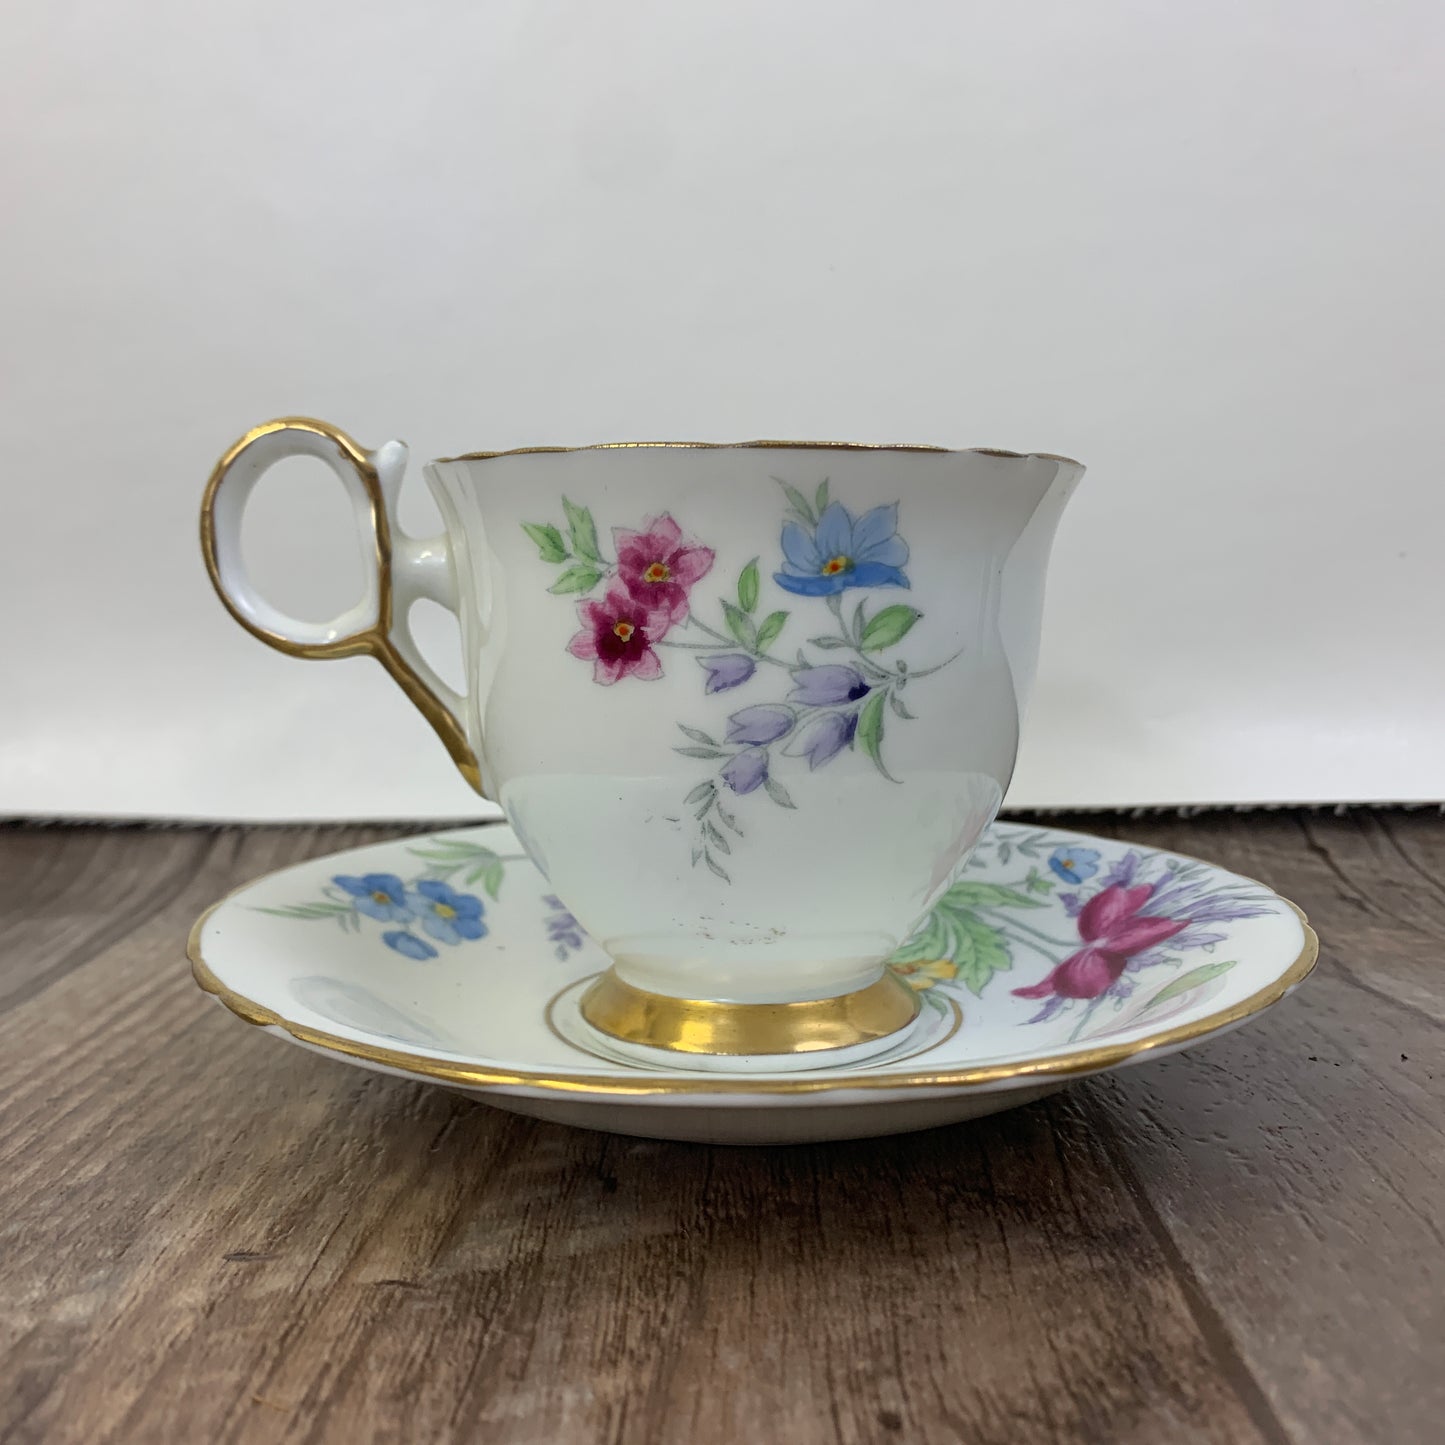 Vintage Teacup Delphine China Hand Painted Tea Cup Pink, Blue, and Yellow Floral Pattern